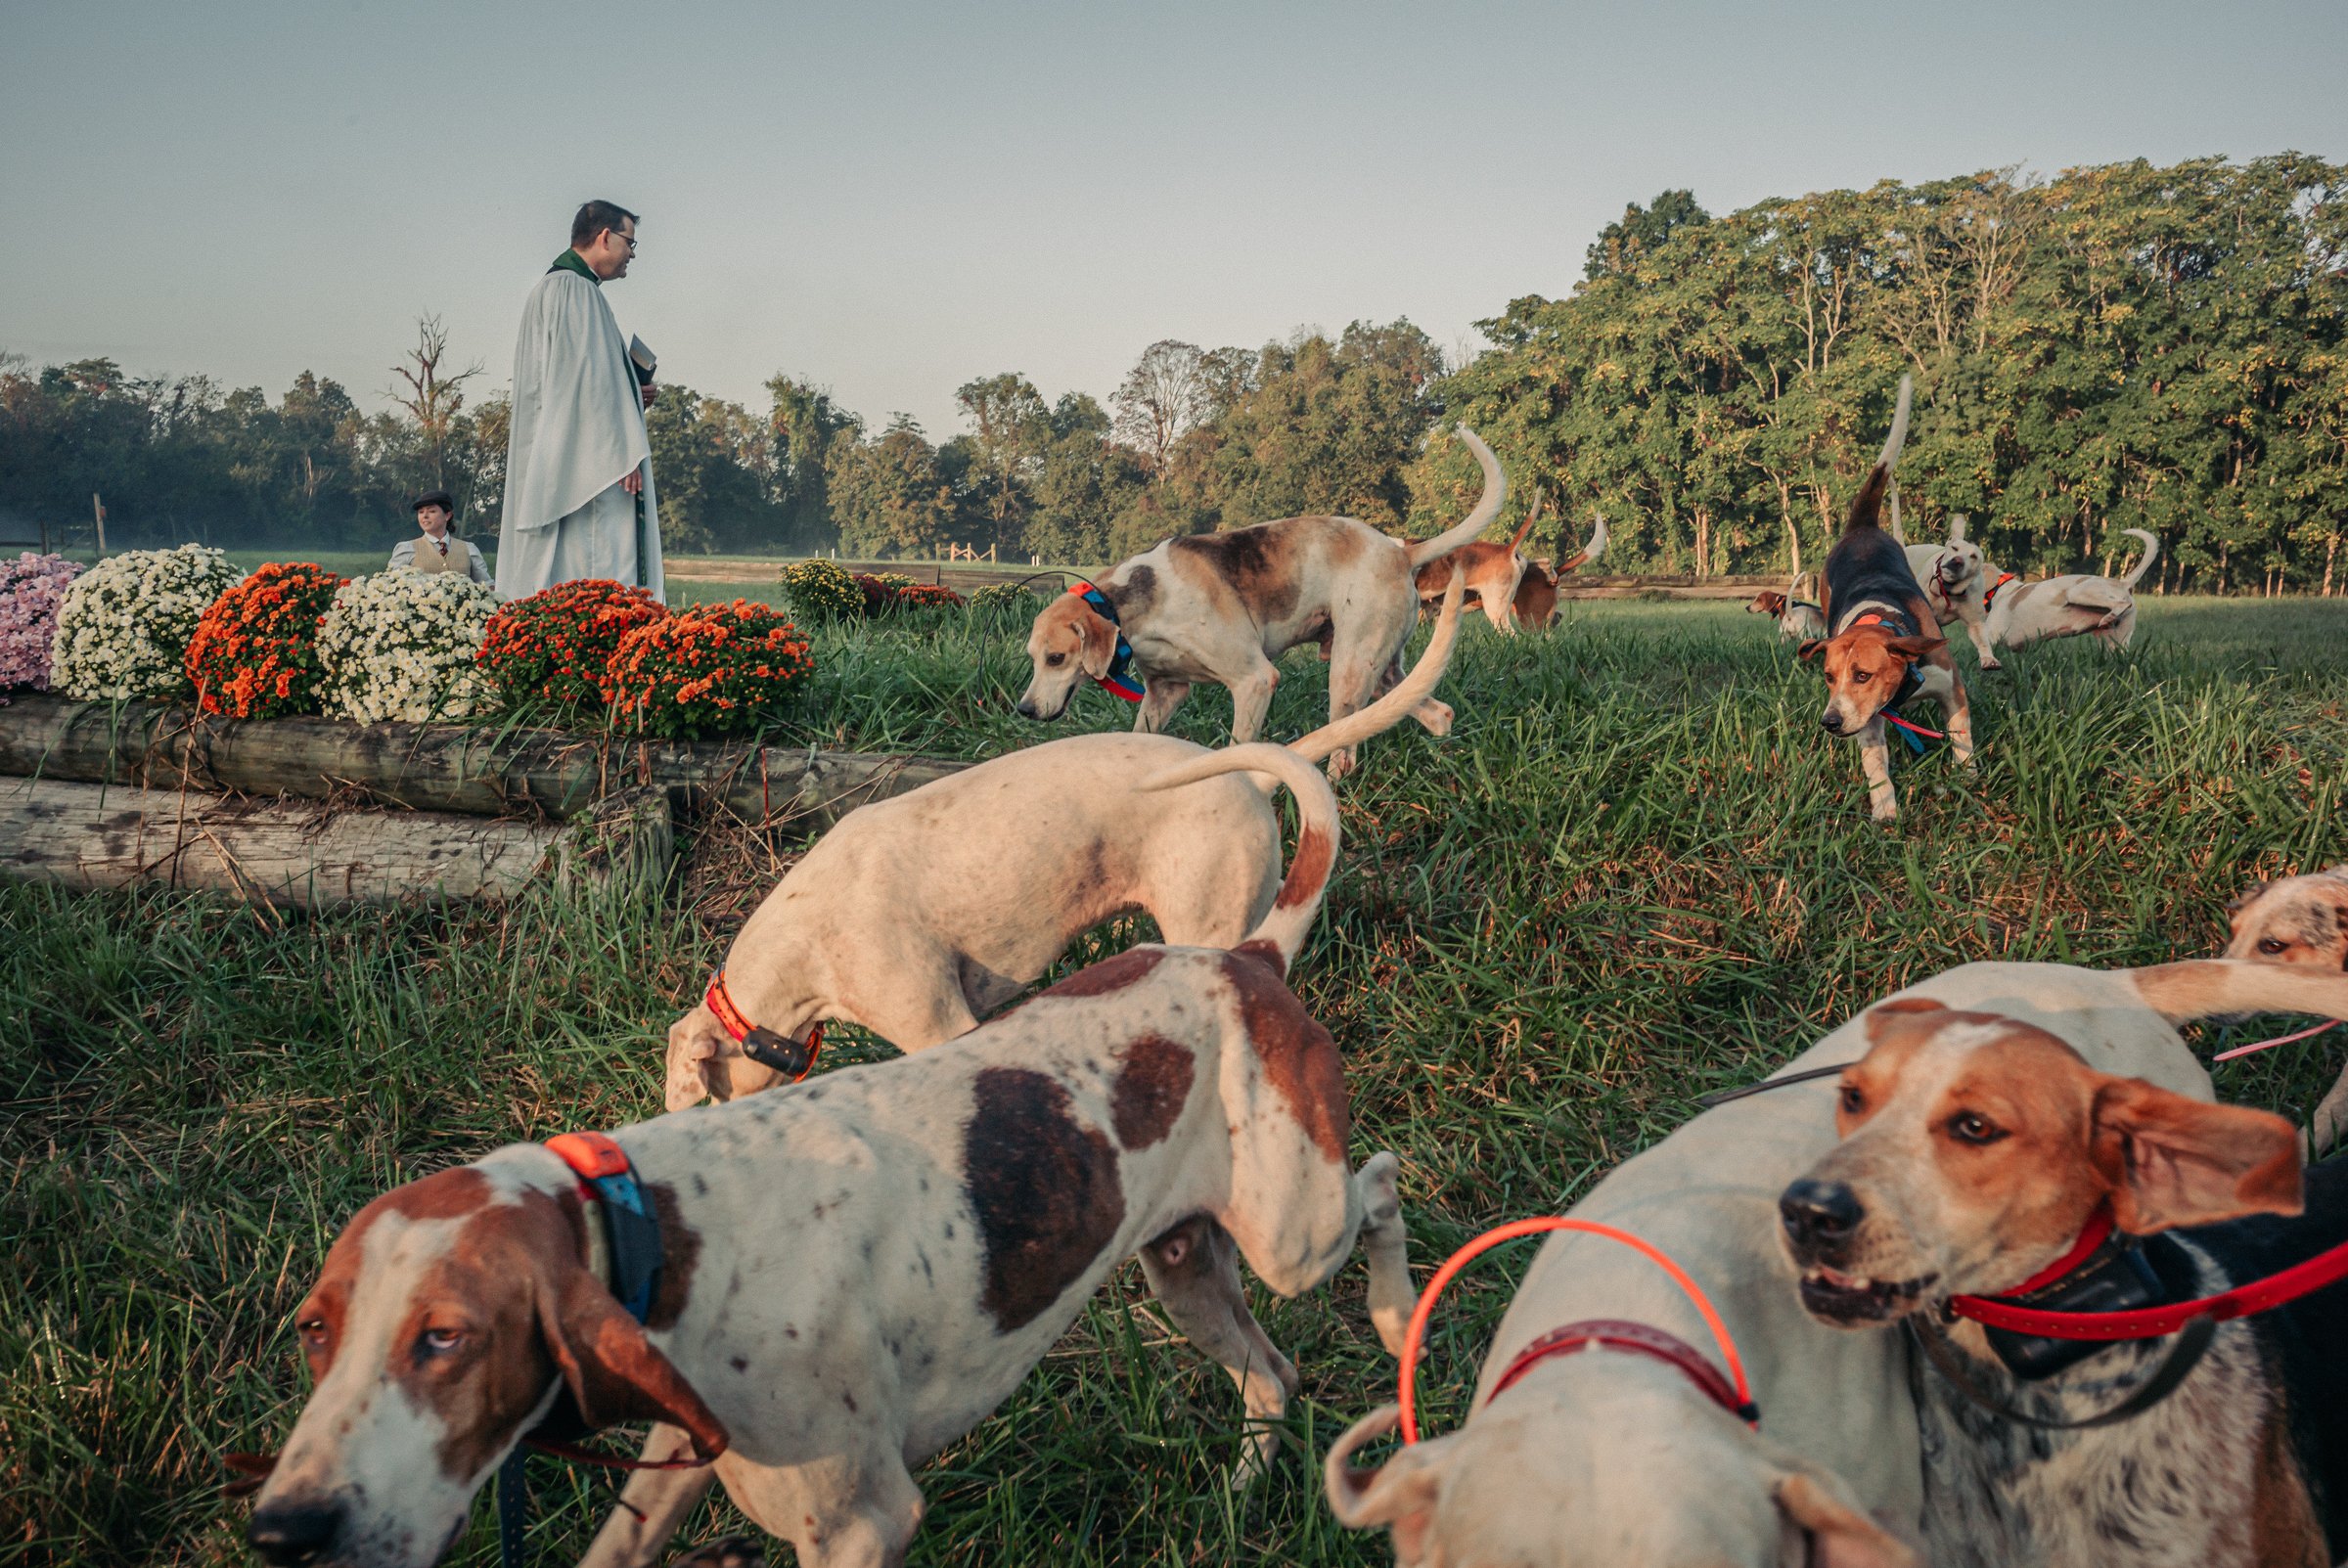 The Camargo foxhounds receive a blessing on the first day of the formal season. Photo by Michael Tittel.